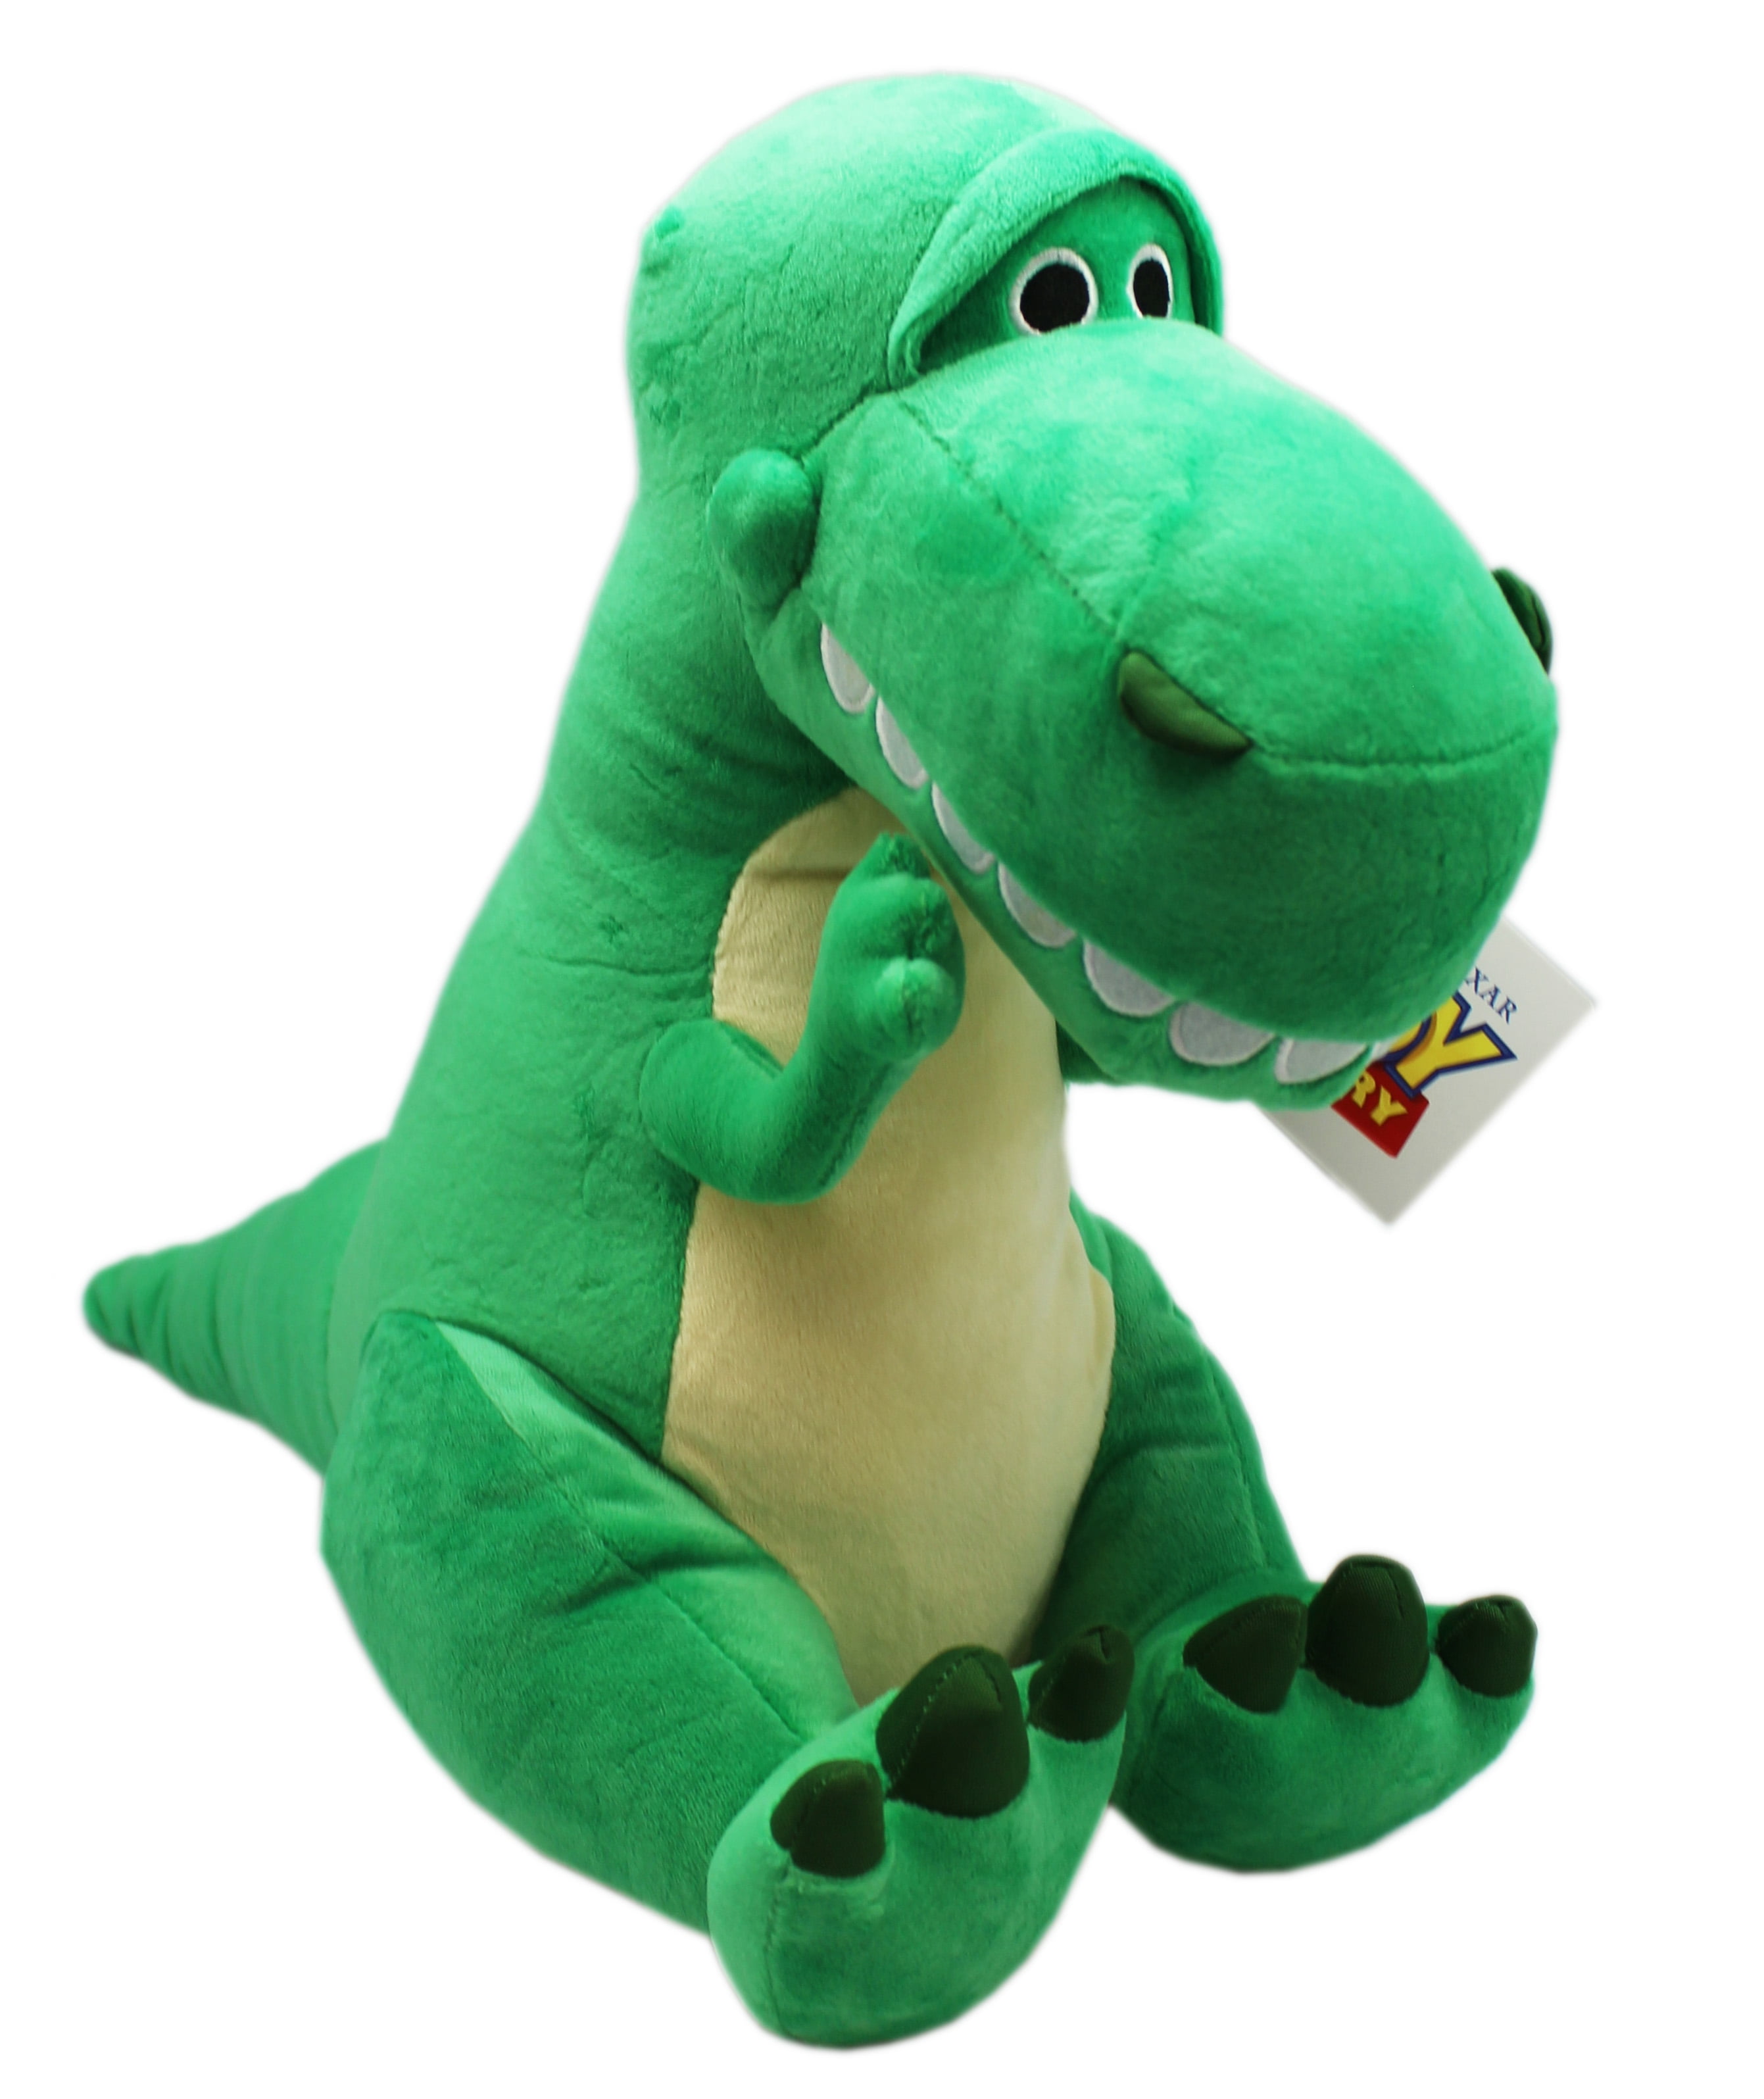 OFFICIAL BRAND NEW 10" BOXED TOY STORY 4 T-REX SOFT PLUSH TOY 